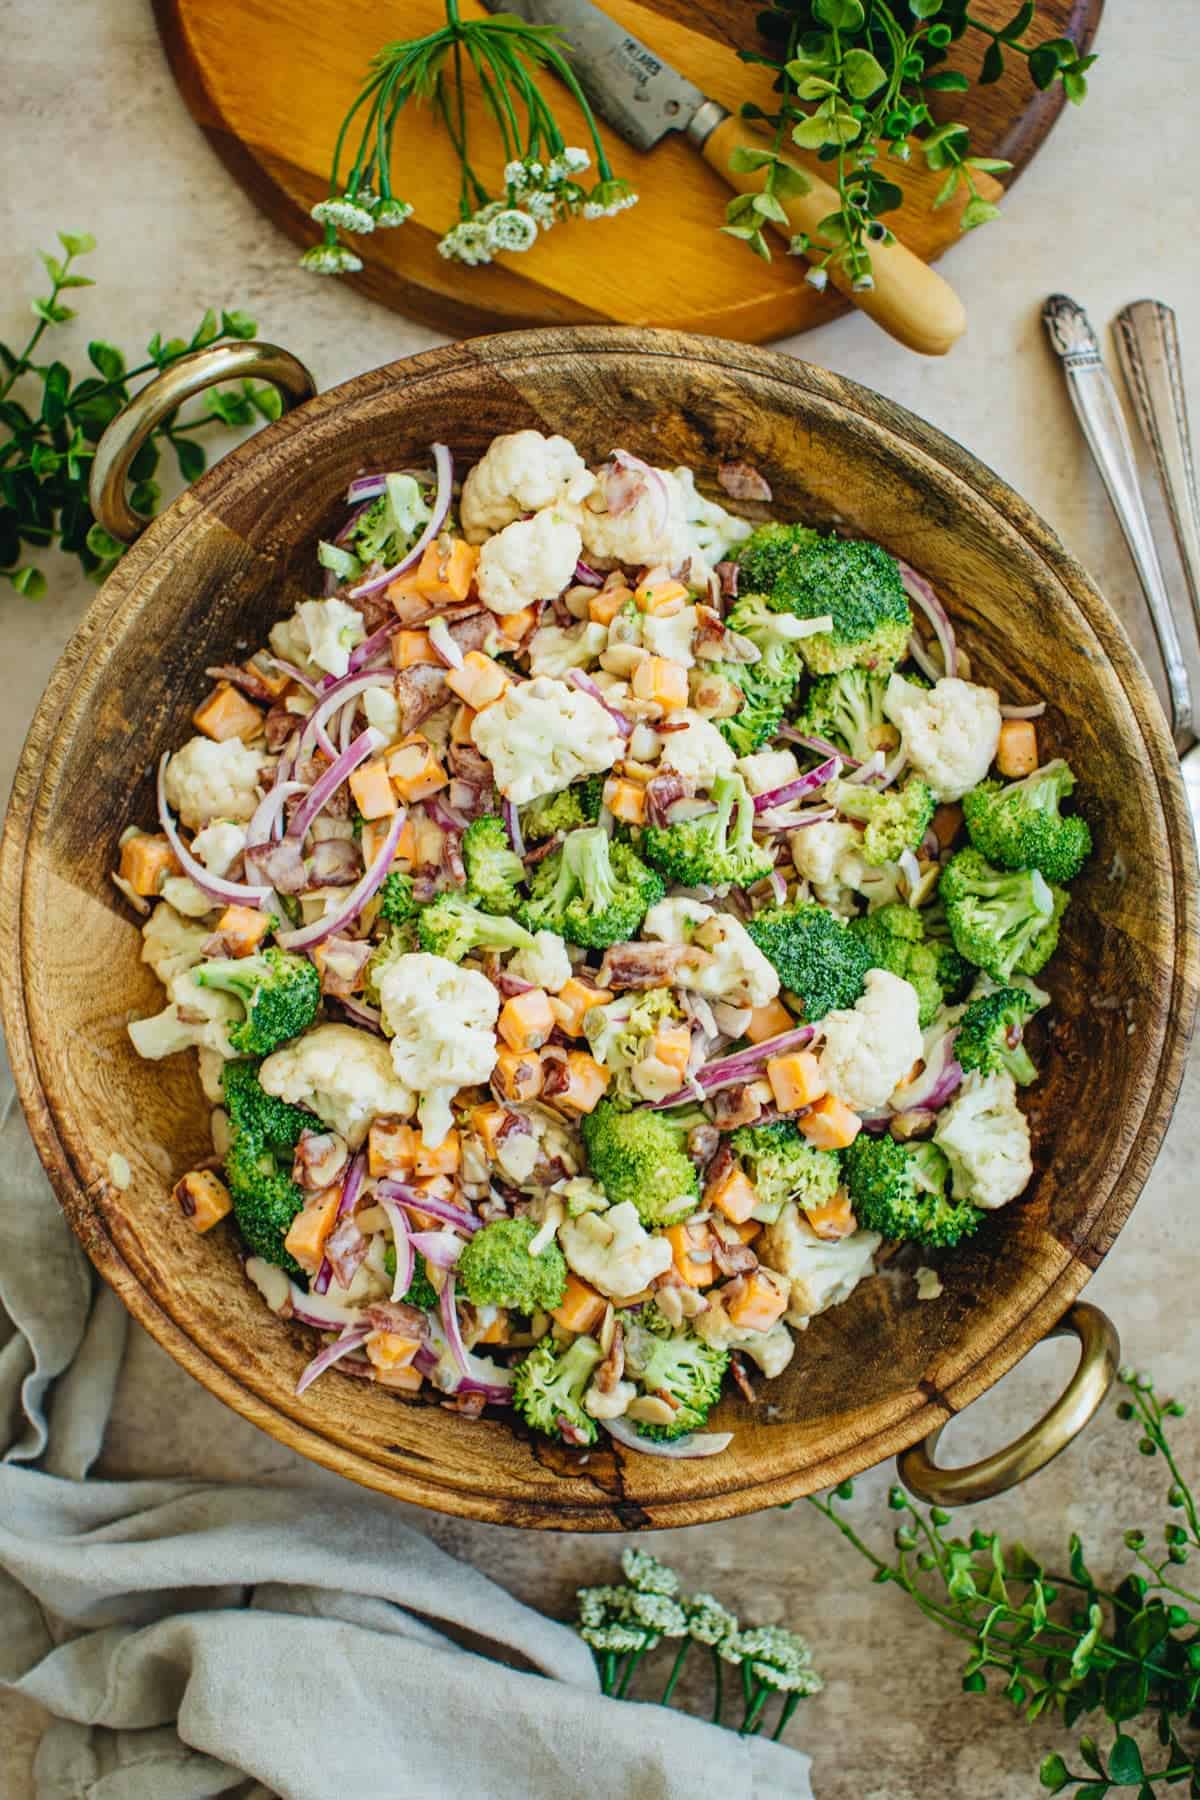 Broccoli and cauliflower salad in a wooden bowl.